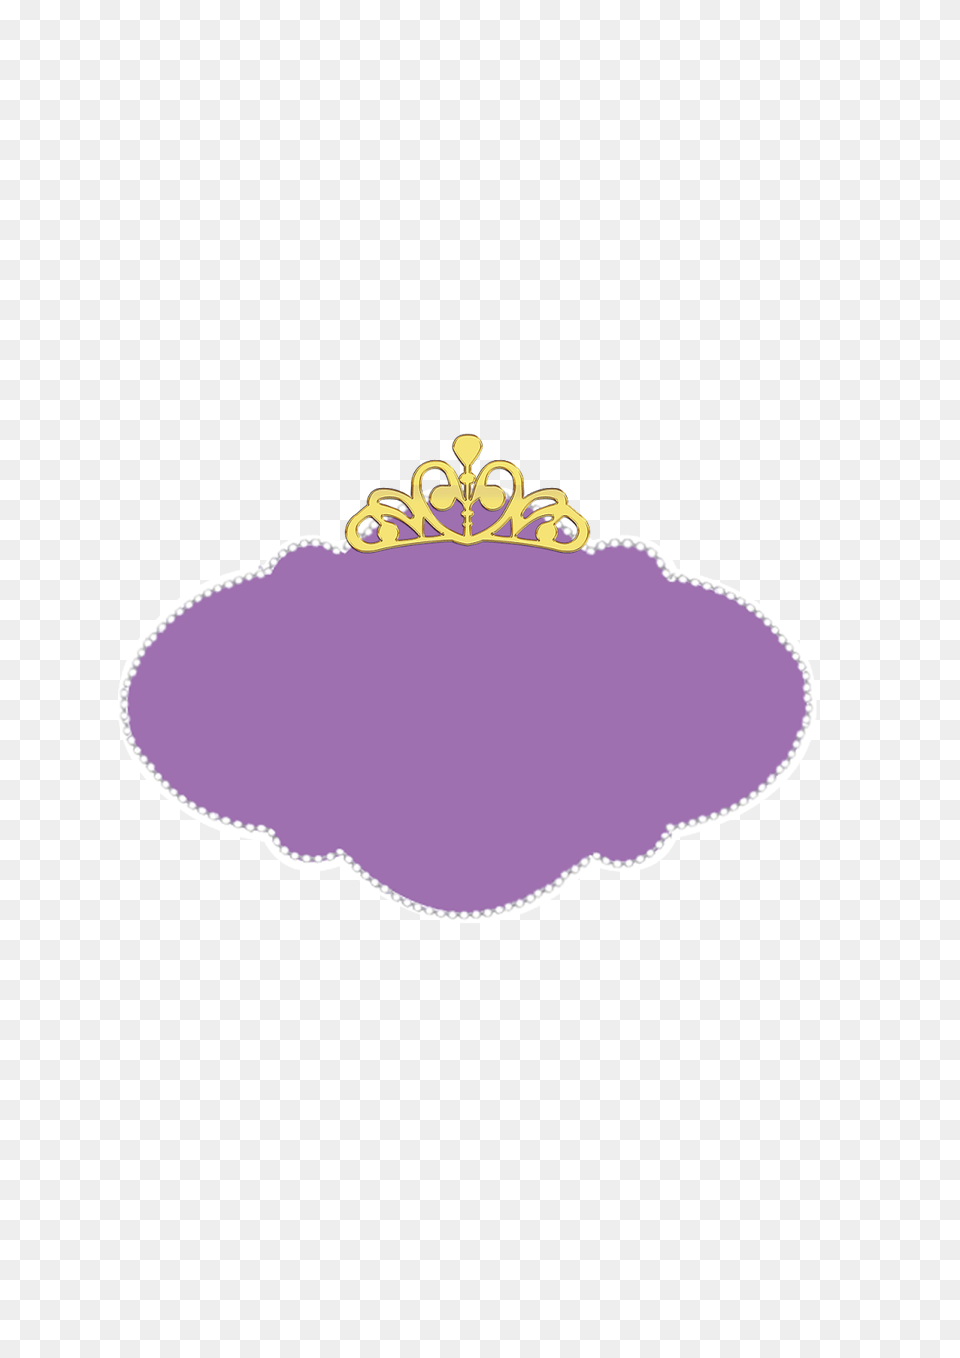 Sofia The First Logo Blank Image, Accessories, Jewelry, Purple, Flower Png